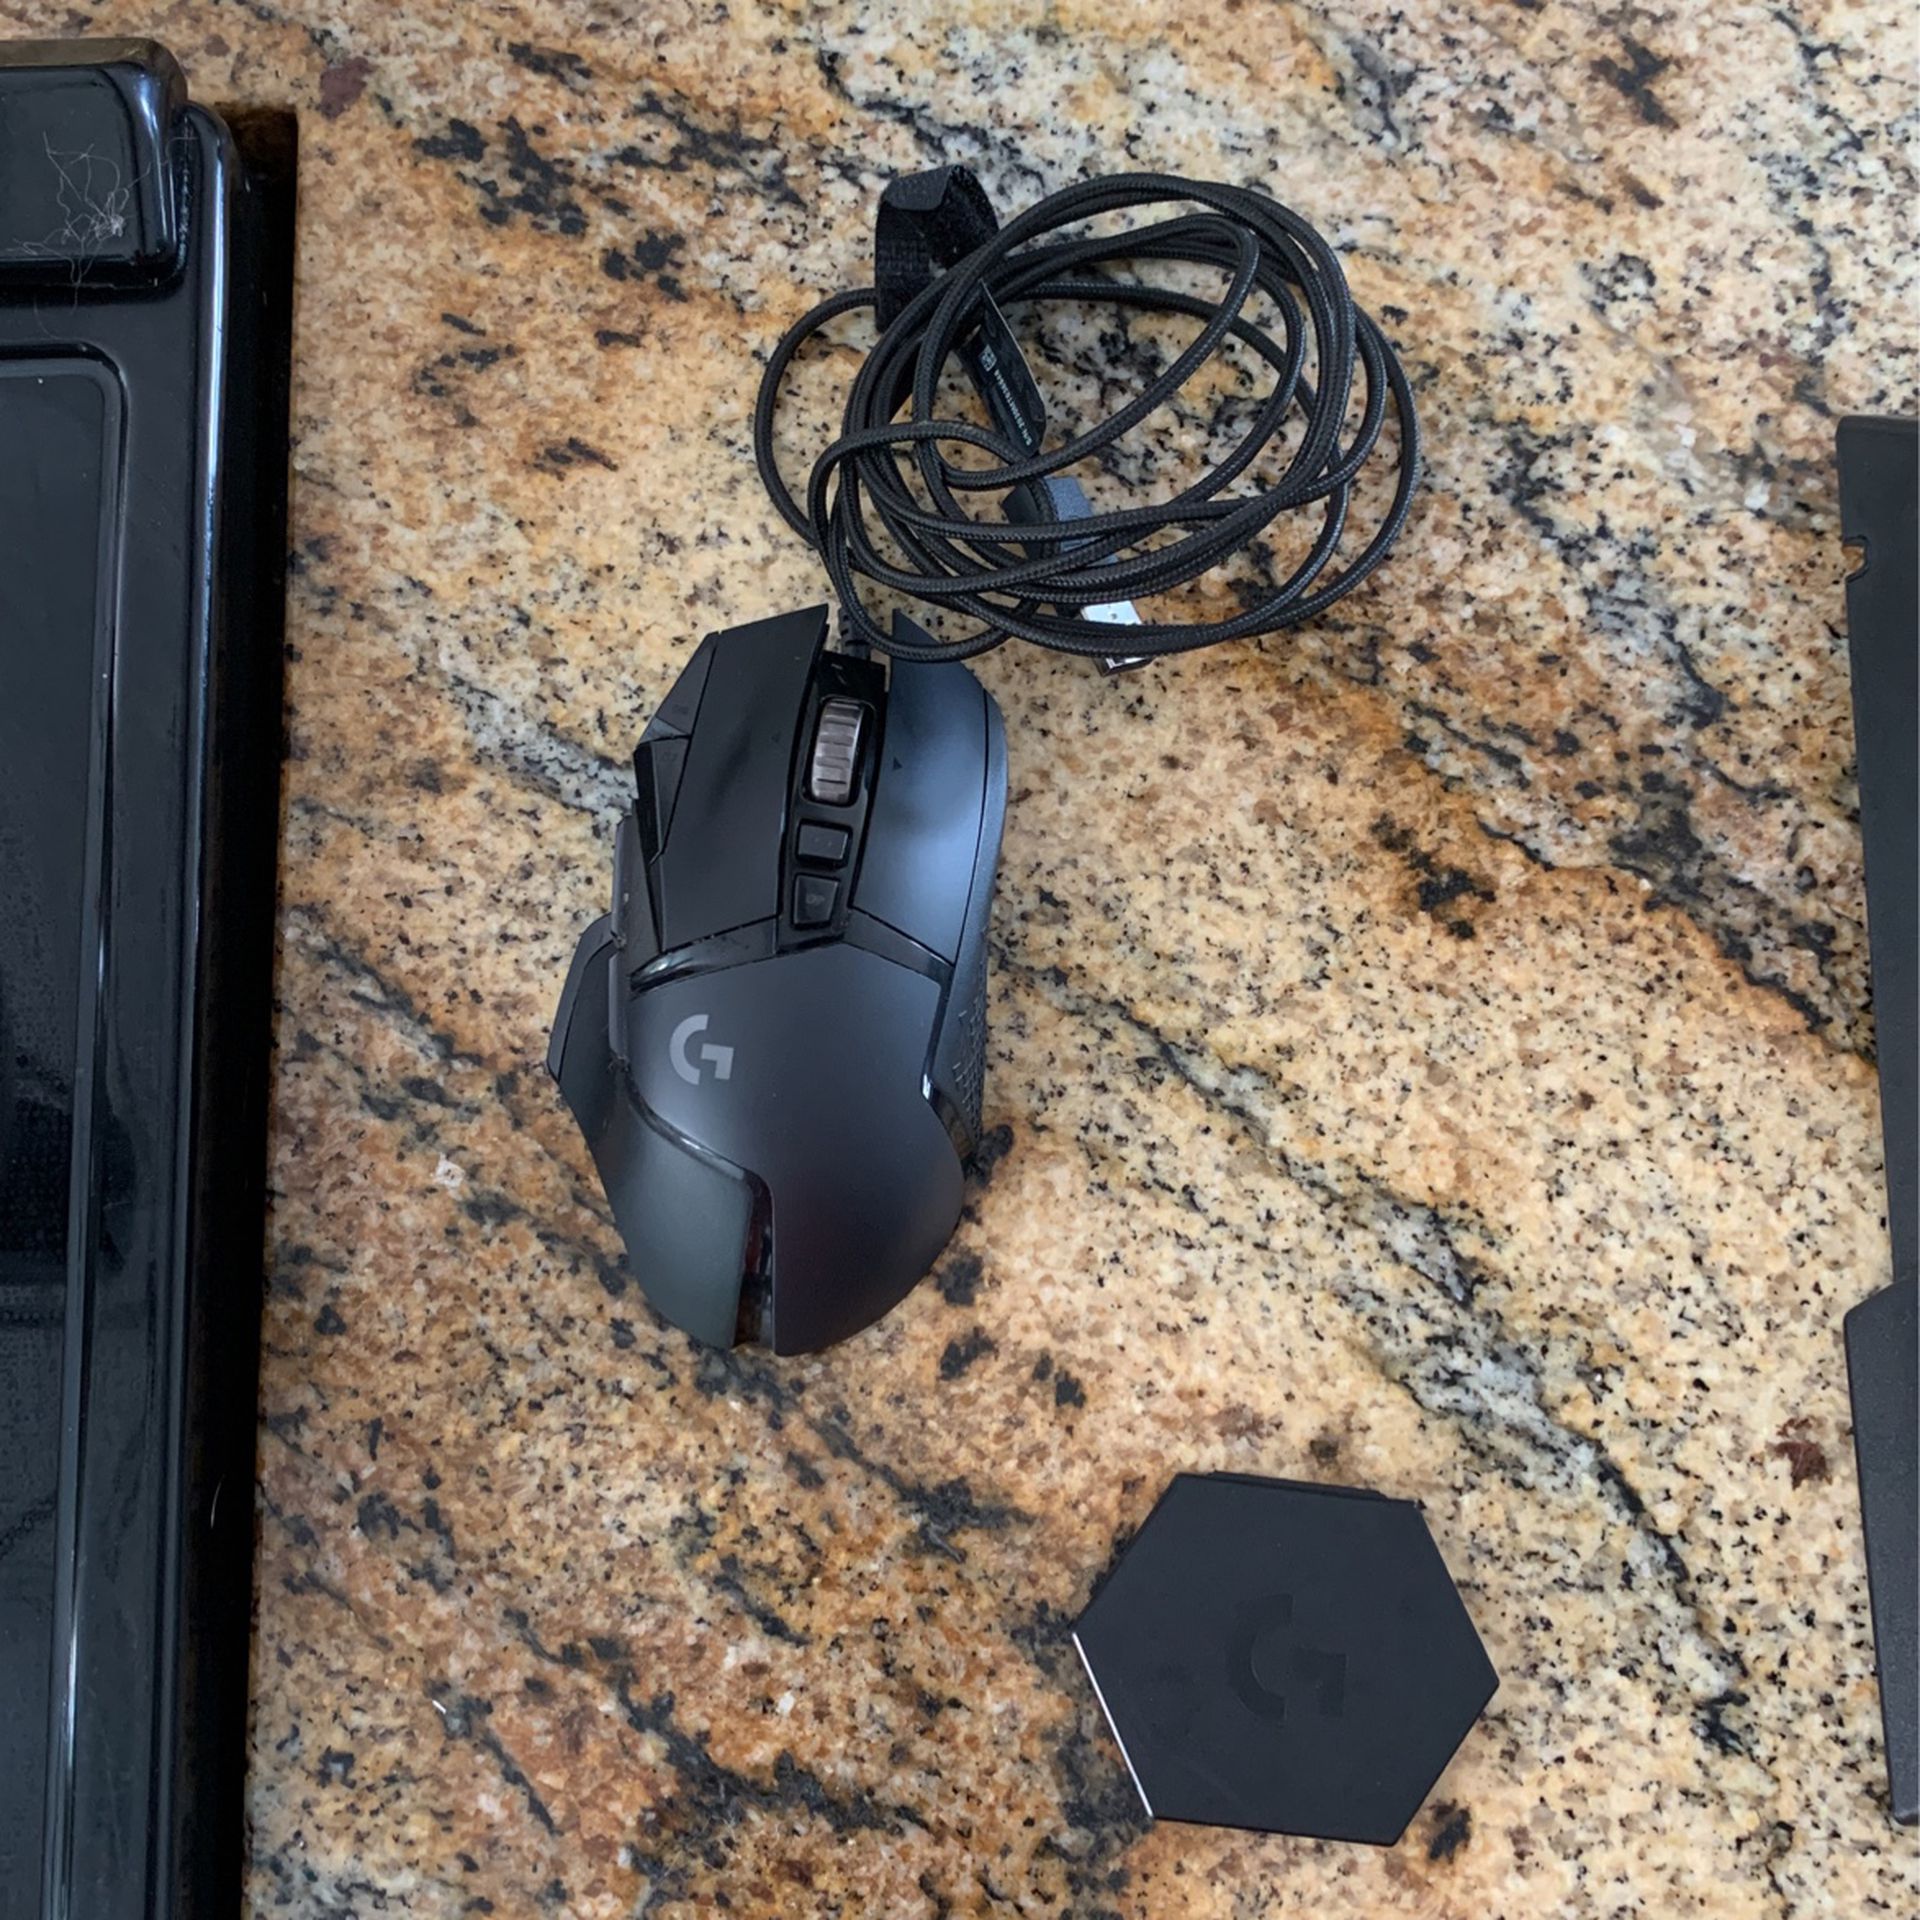 Logitech Gaming Mouse With Weights 